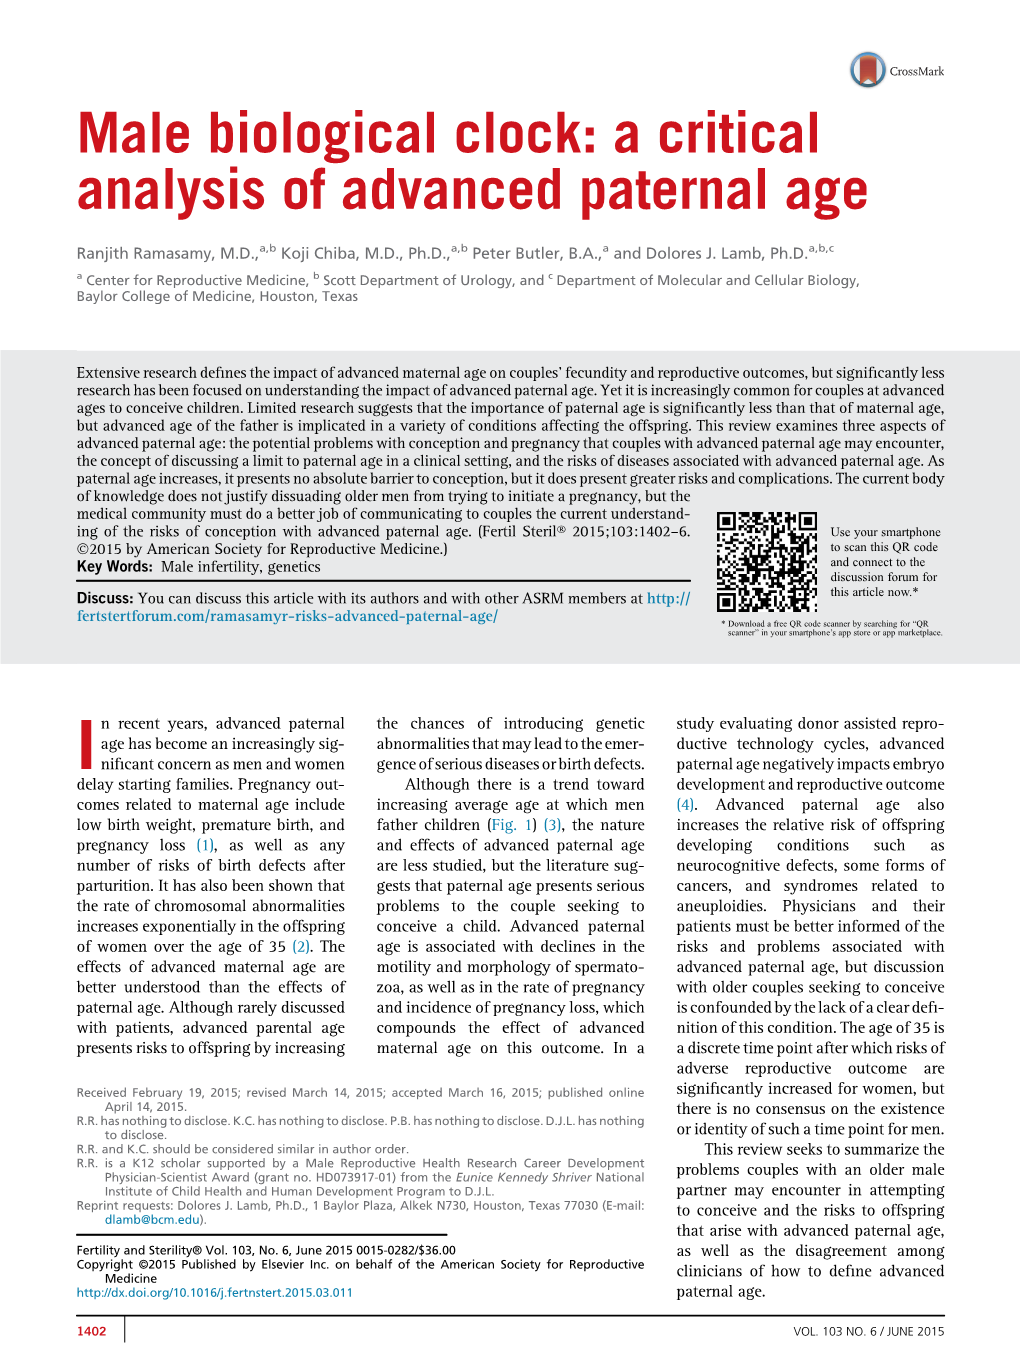 Male Biological Clock: a Critical Analysis of Advanced Paternal Age